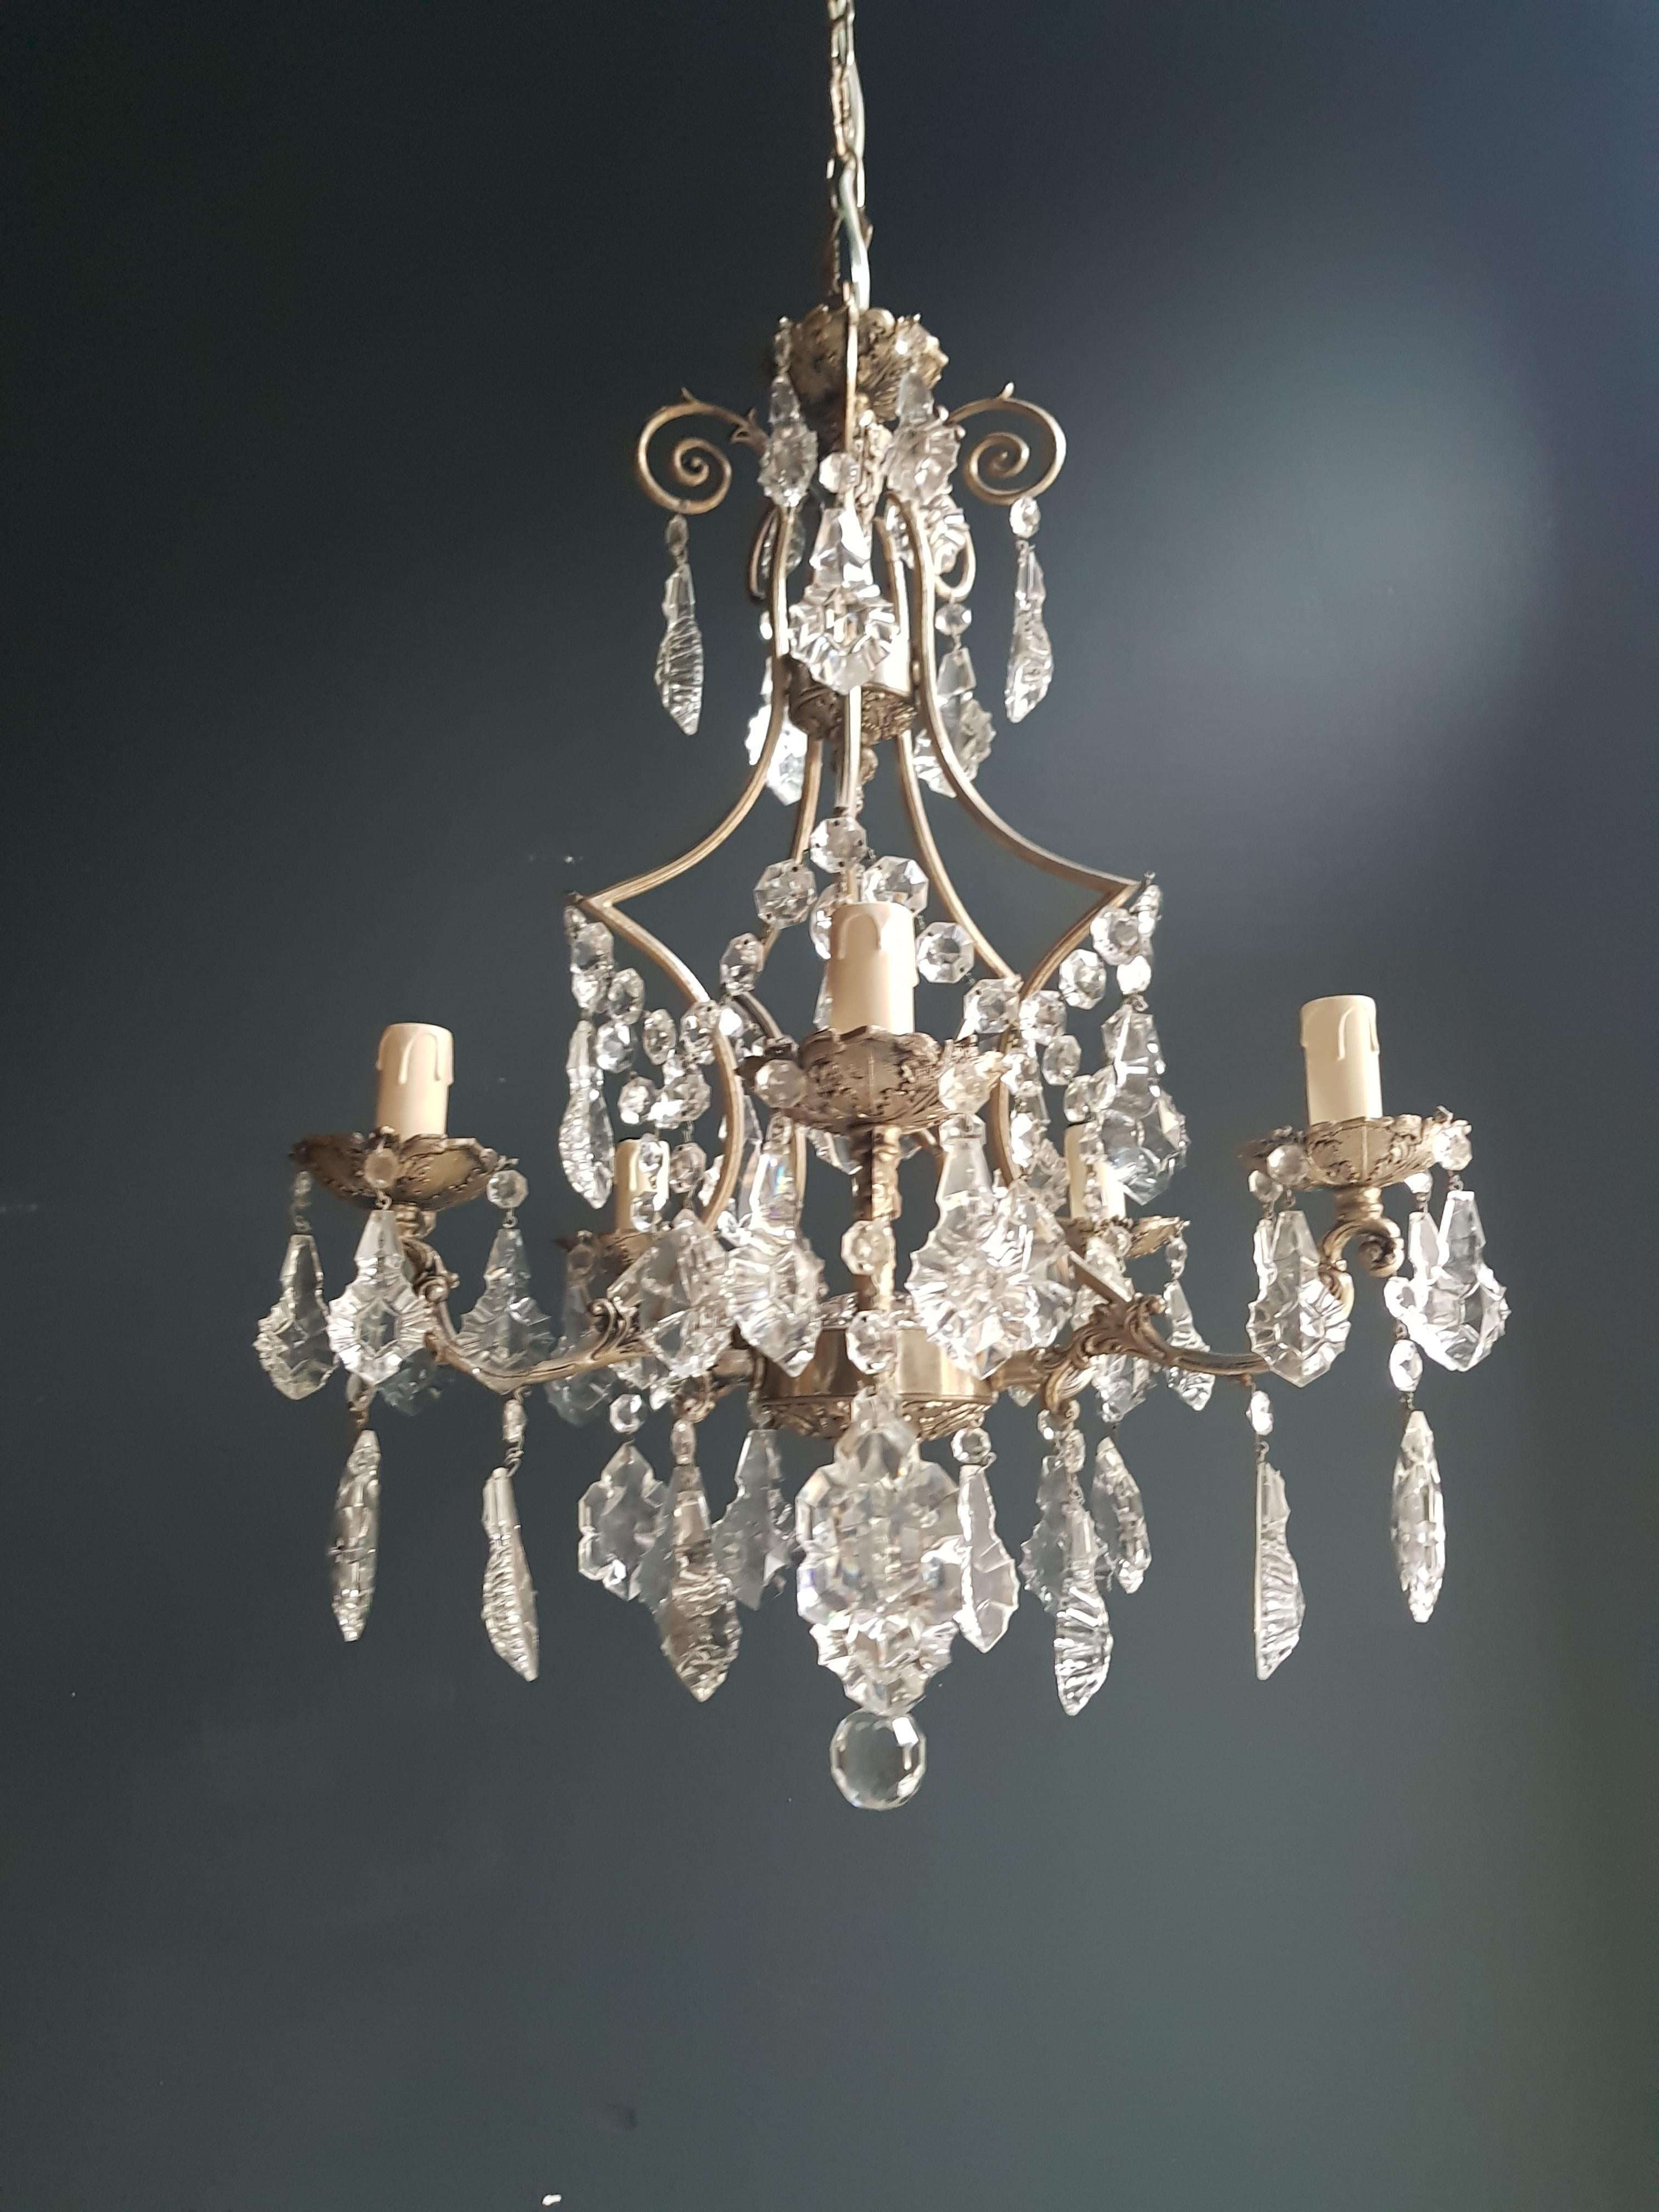 Silvered cage putt crystal chandelier antique ceiling lamp lustre

Measures: Total height 120 cm, height without chain 66 cm, diameter 47 cm. Weight (approximately): 5kg.

Number of lights: Five-light bulb sockets:  E14 material: Brass, glass,